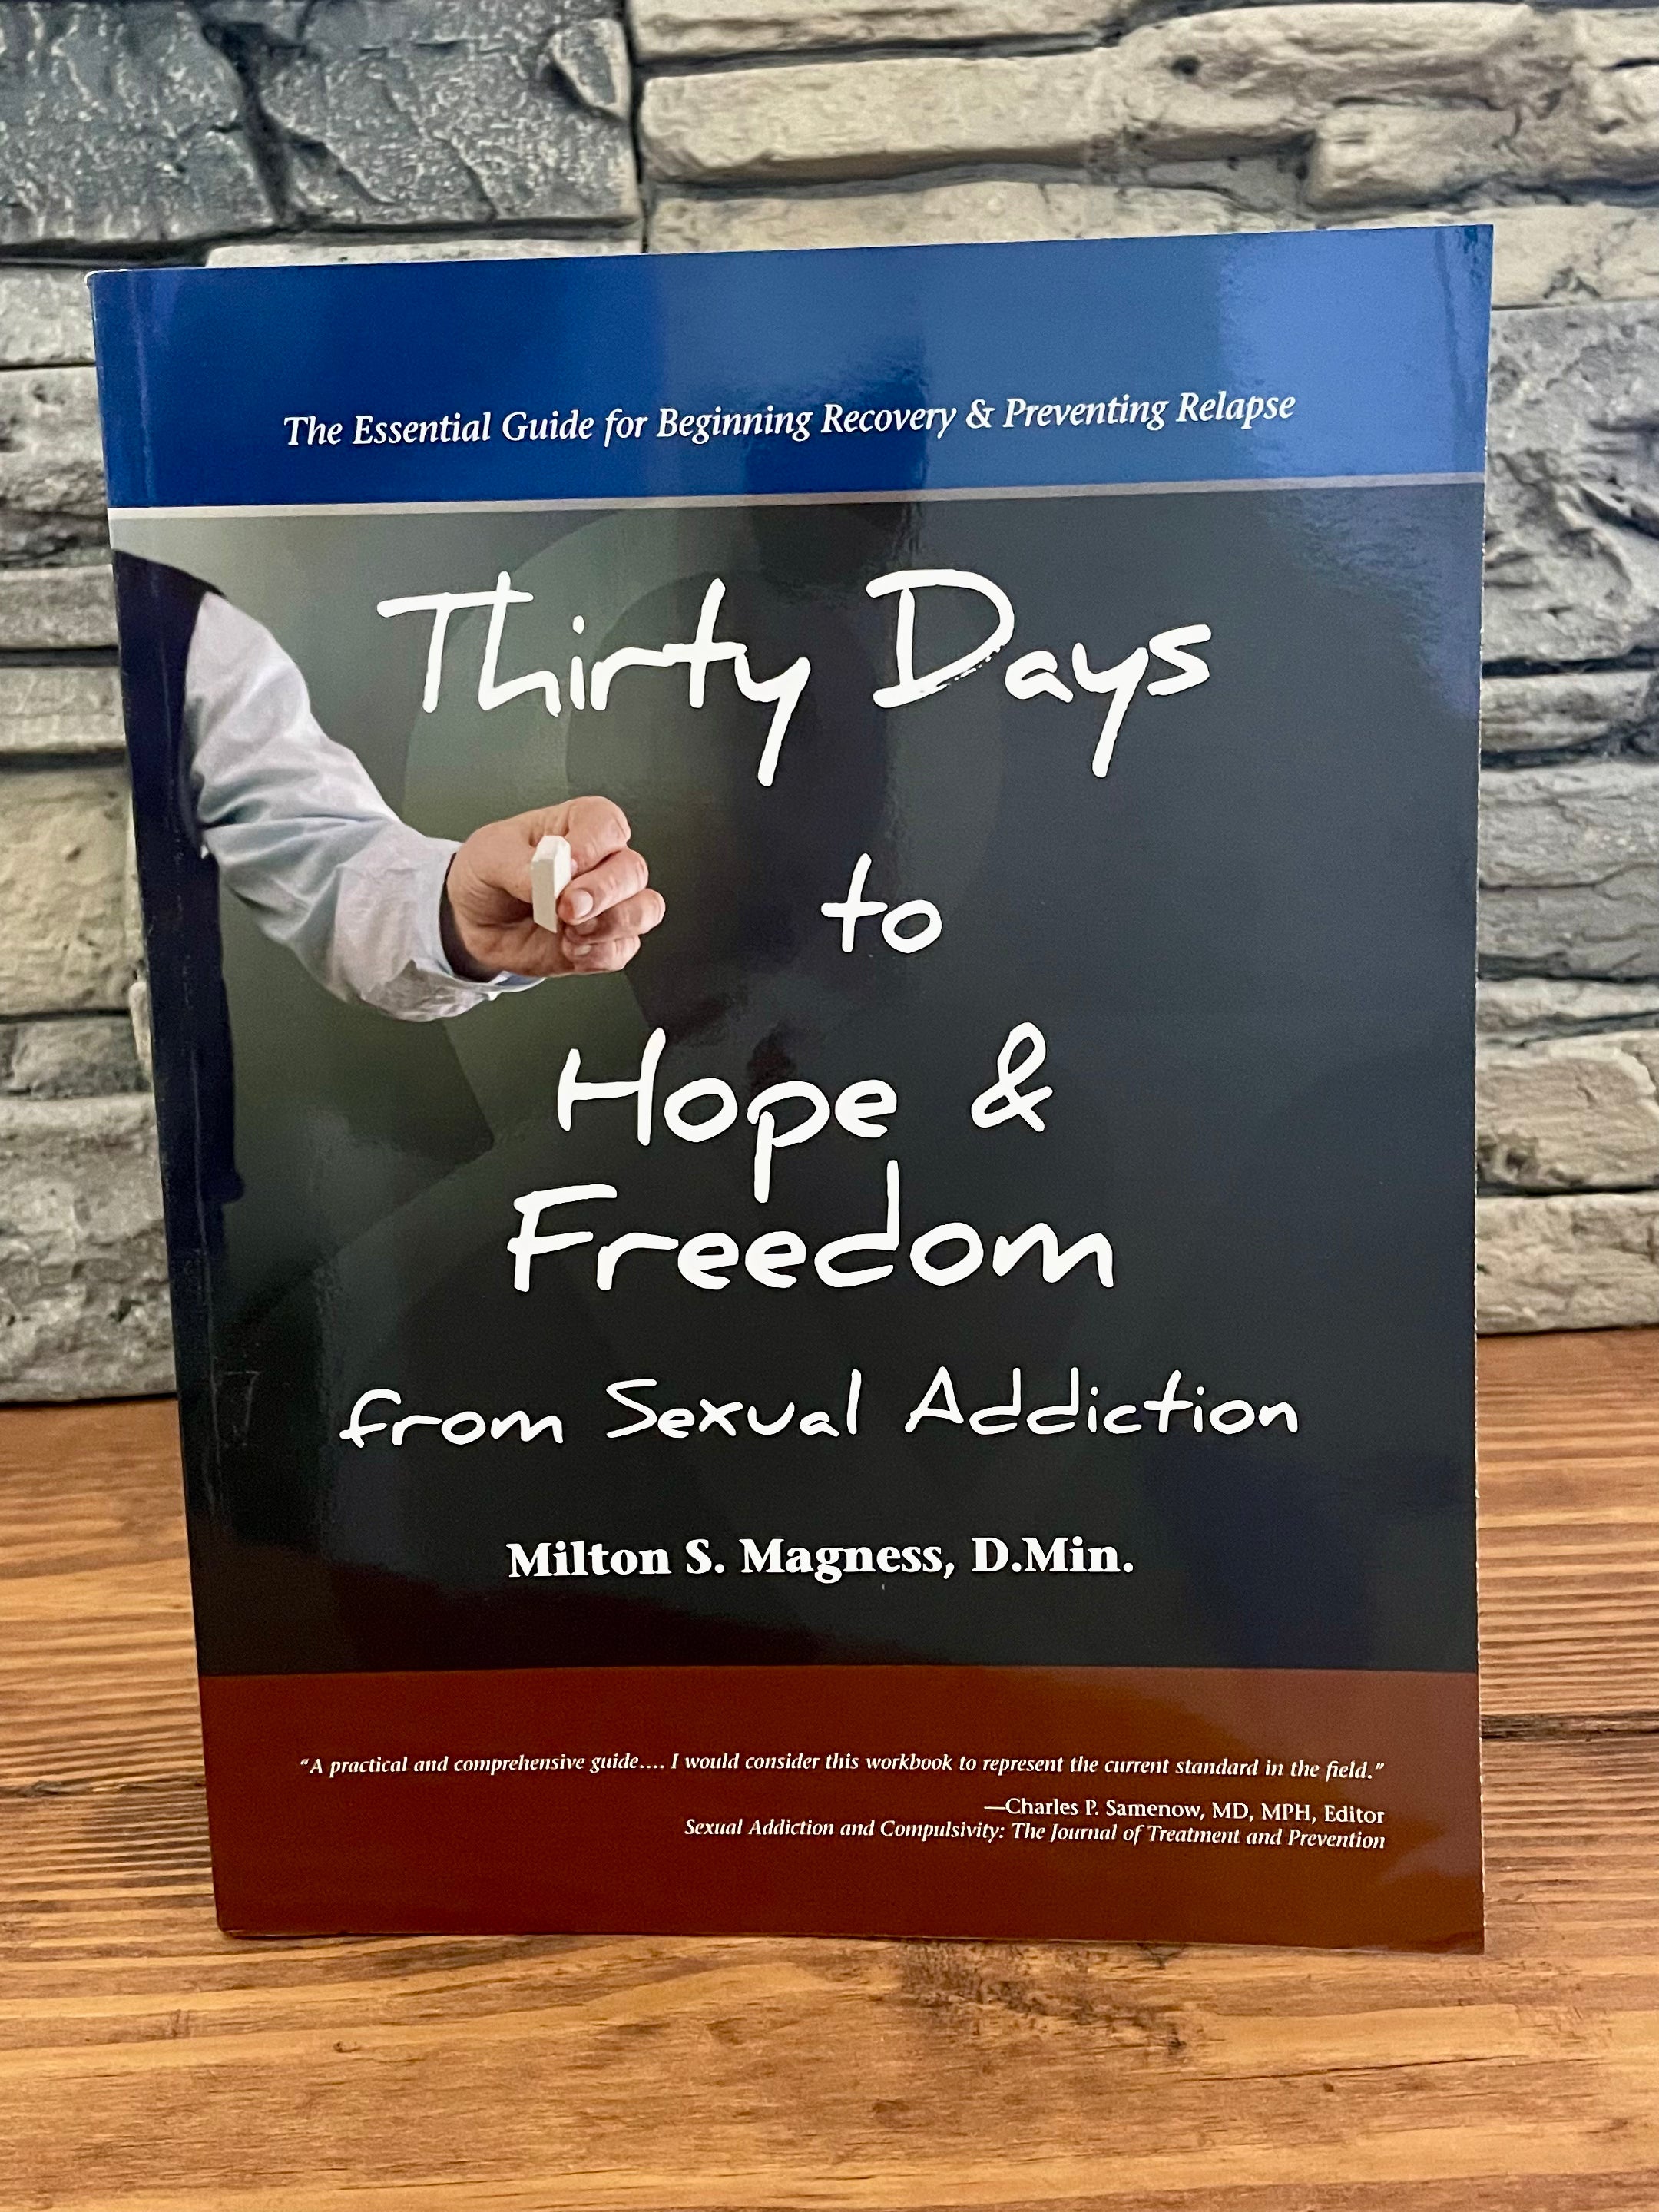 30 days to Hope & Freedom from Sexual Addiction Workbook